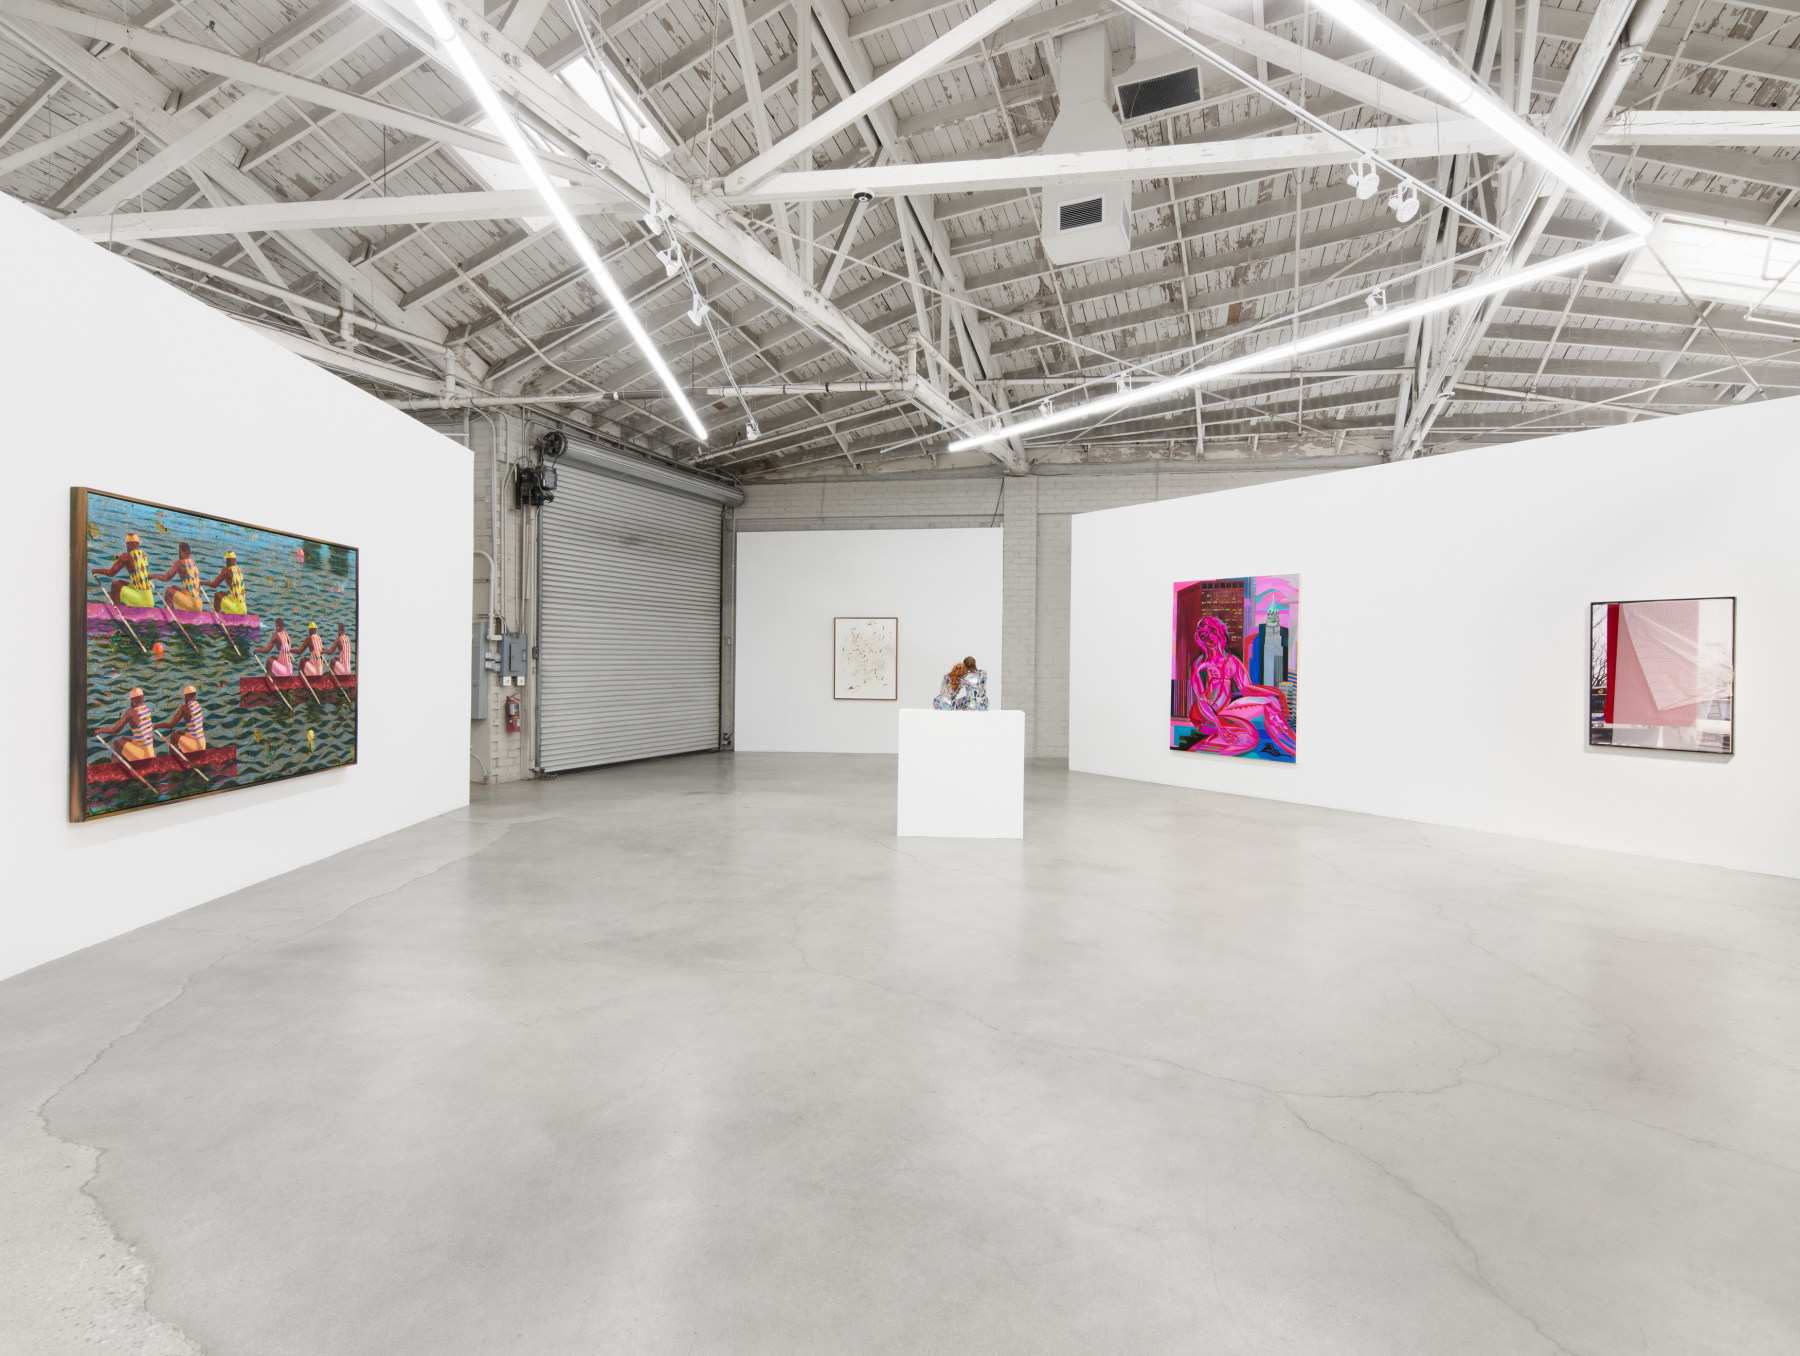 Installation view of Majeure Force, Part One, featuring works by Derek Fordjour, Awol Erizku, Samara Golden, Mira Dancy, and Rose Marcus.